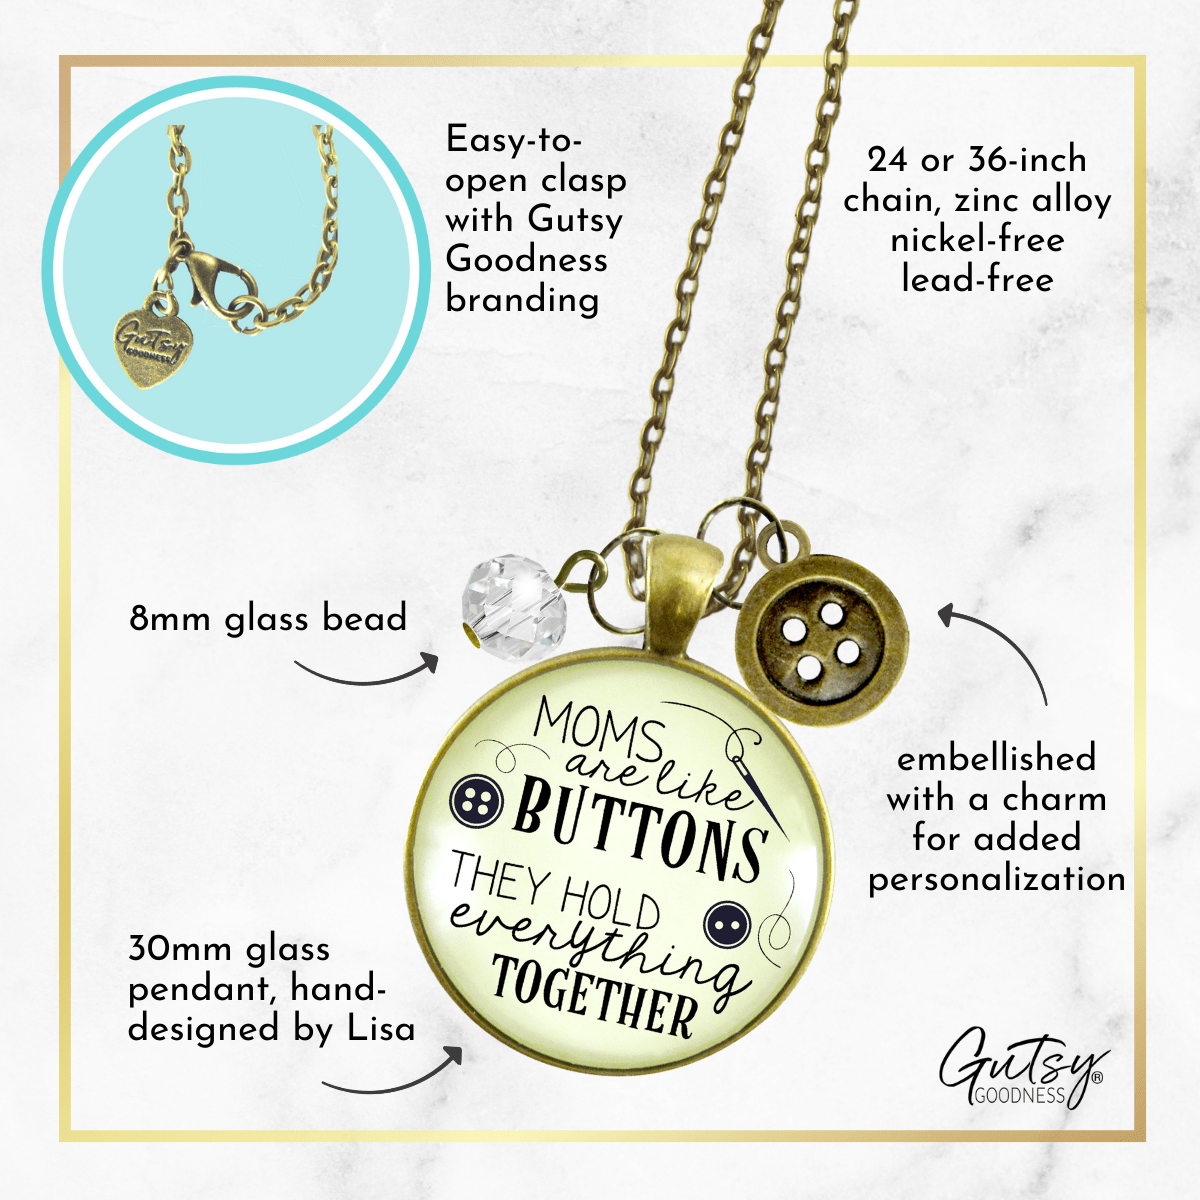 Gutsy Goodness Family Necklace Moms Like Buttons Mother Seamstress Jewelry Charm - Gutsy Goodness Handmade Jewelry;Family Necklace Moms Like Buttons Mother Seamstress Jewelry Charm - Gutsy Goodness Handmade Jewelry Gifts